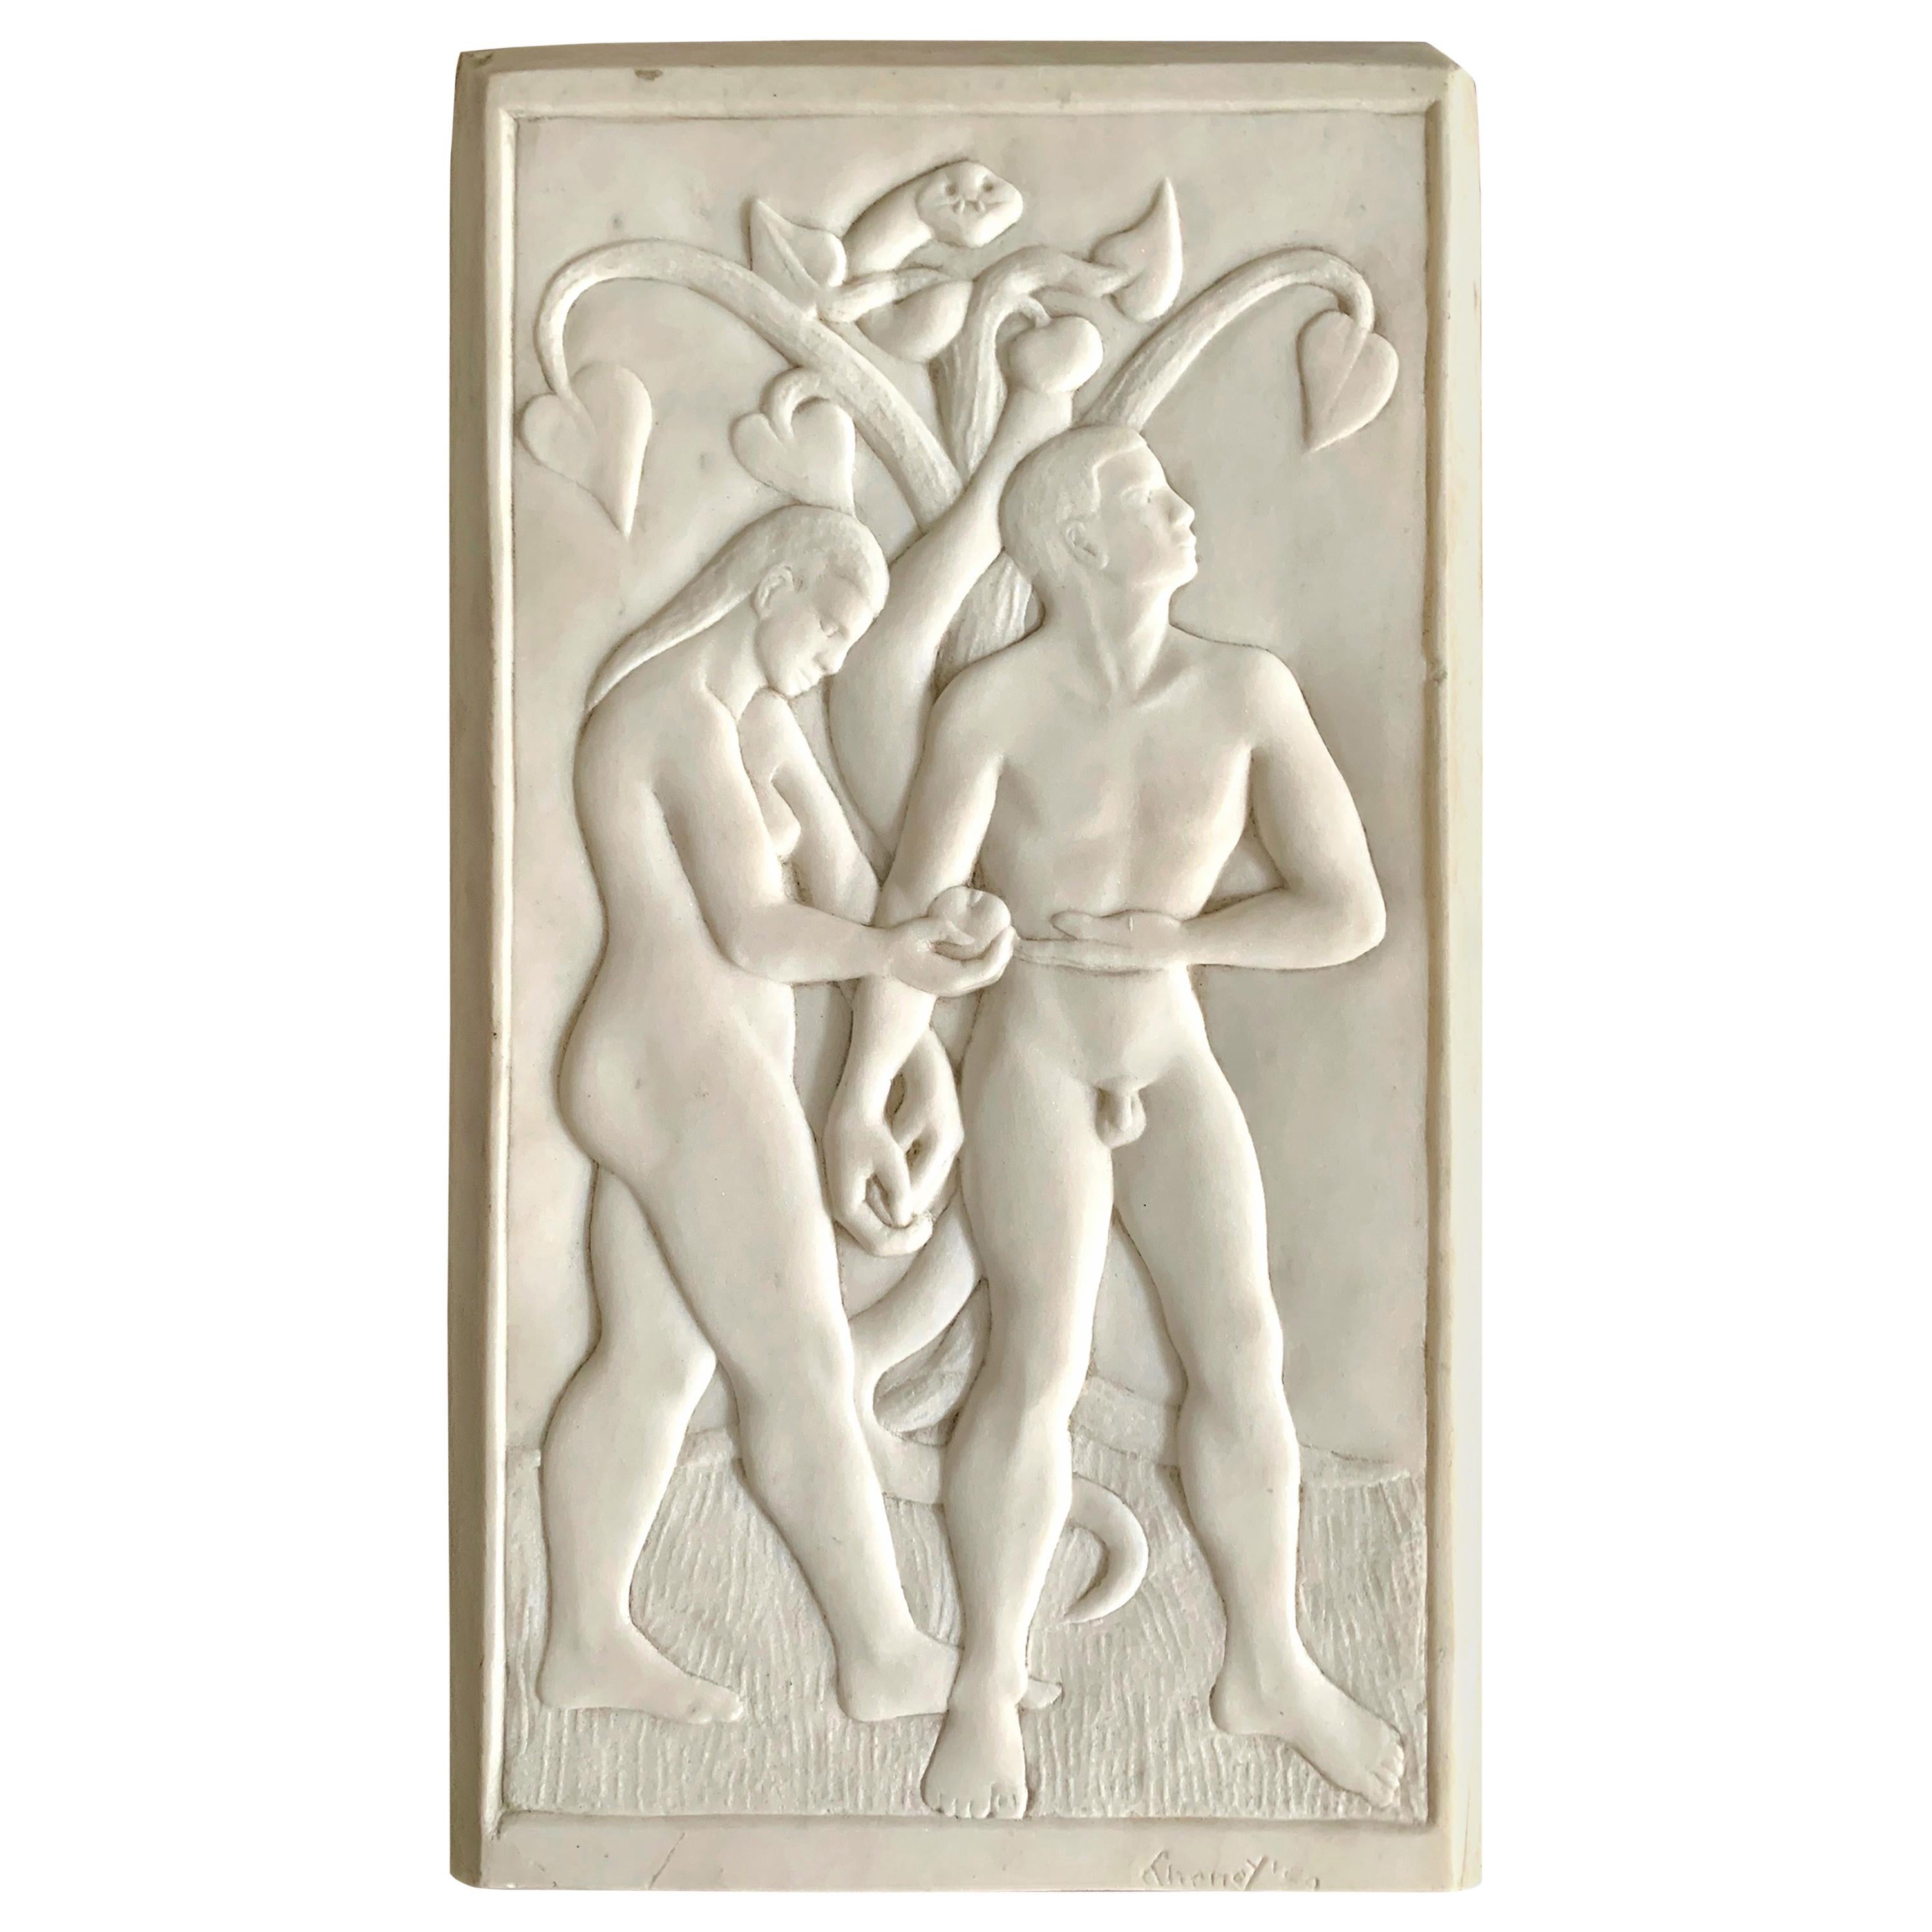 "Adam and Eve, " Bas Relief Marble Sculpture, Art Deco with Folk Art Influence